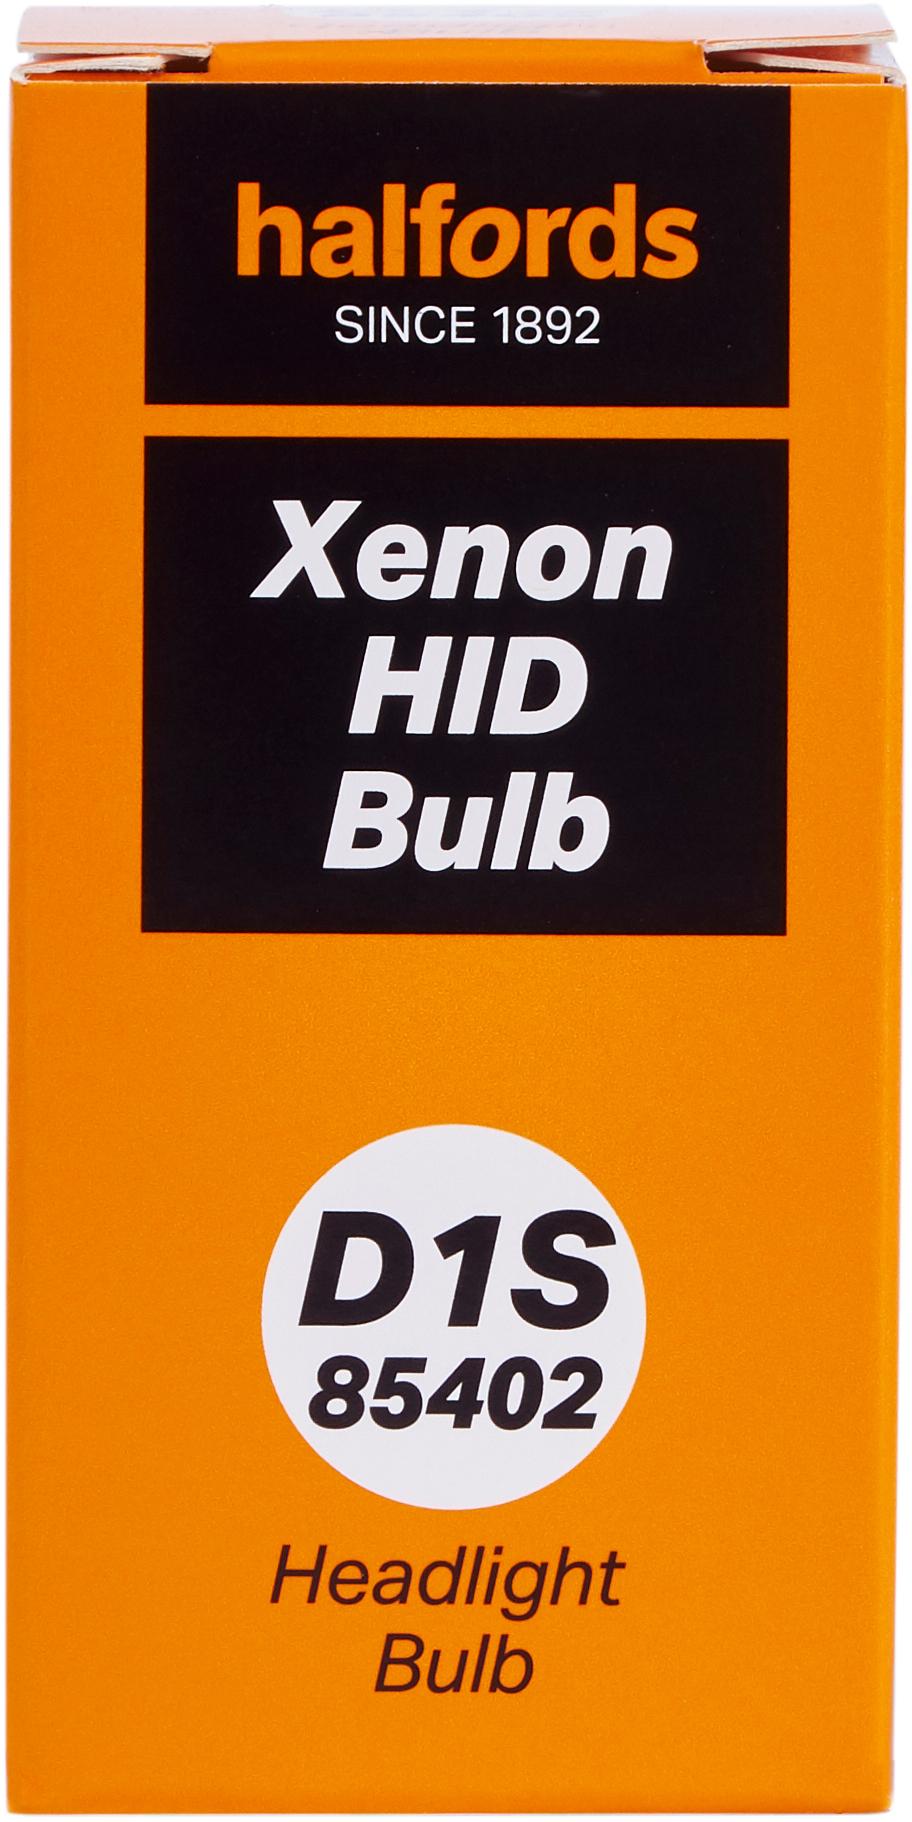 D1S 85402 Xenon Hid Manufacturers Standard Halfords Single Pack